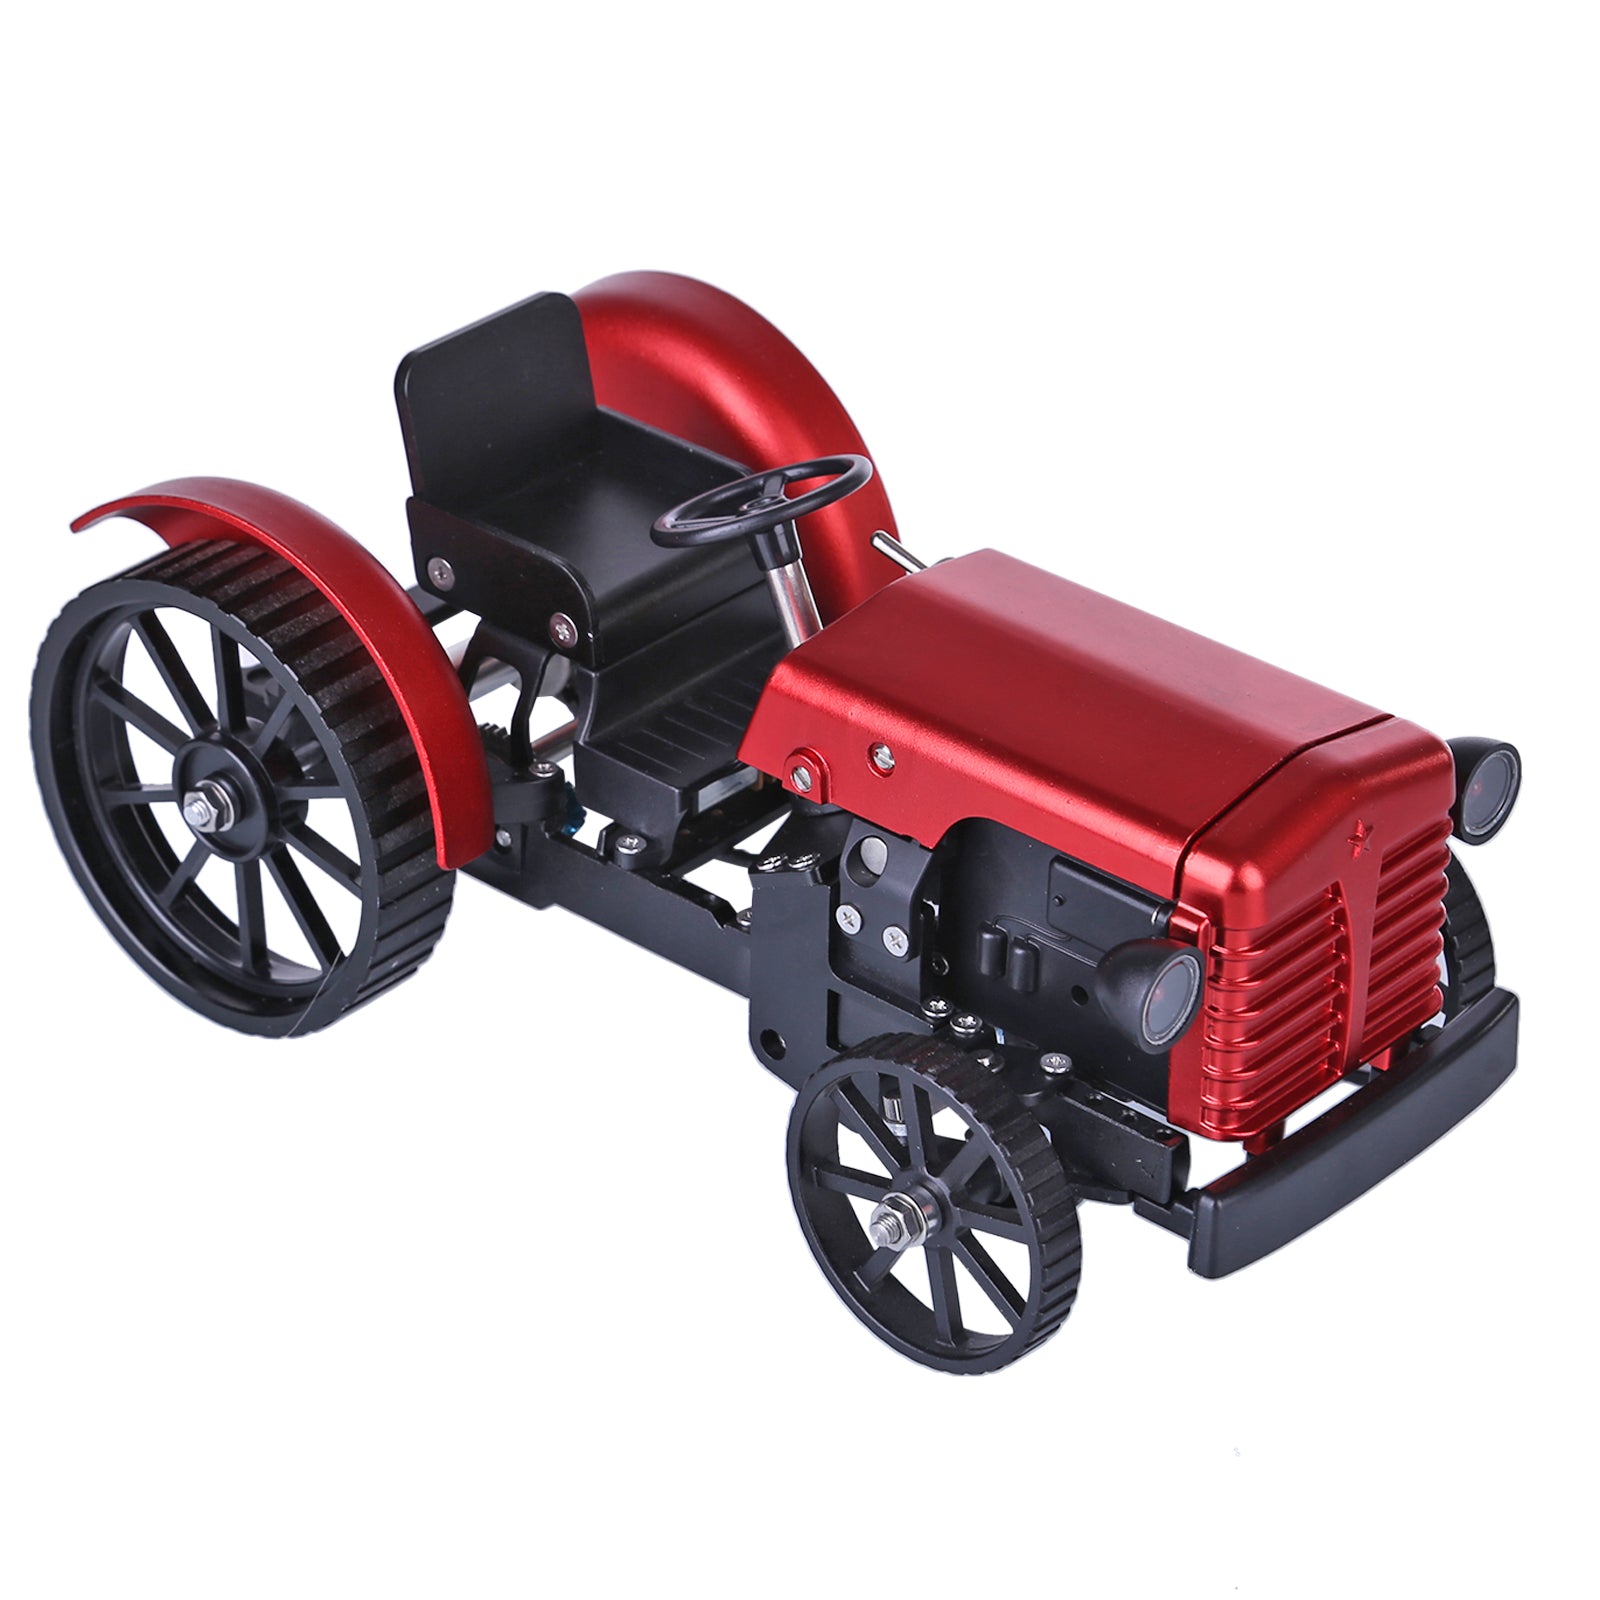 How to Build Tractor Model - Teching Mini APP Remote Control Red Tractor Model Kits | Enginediy